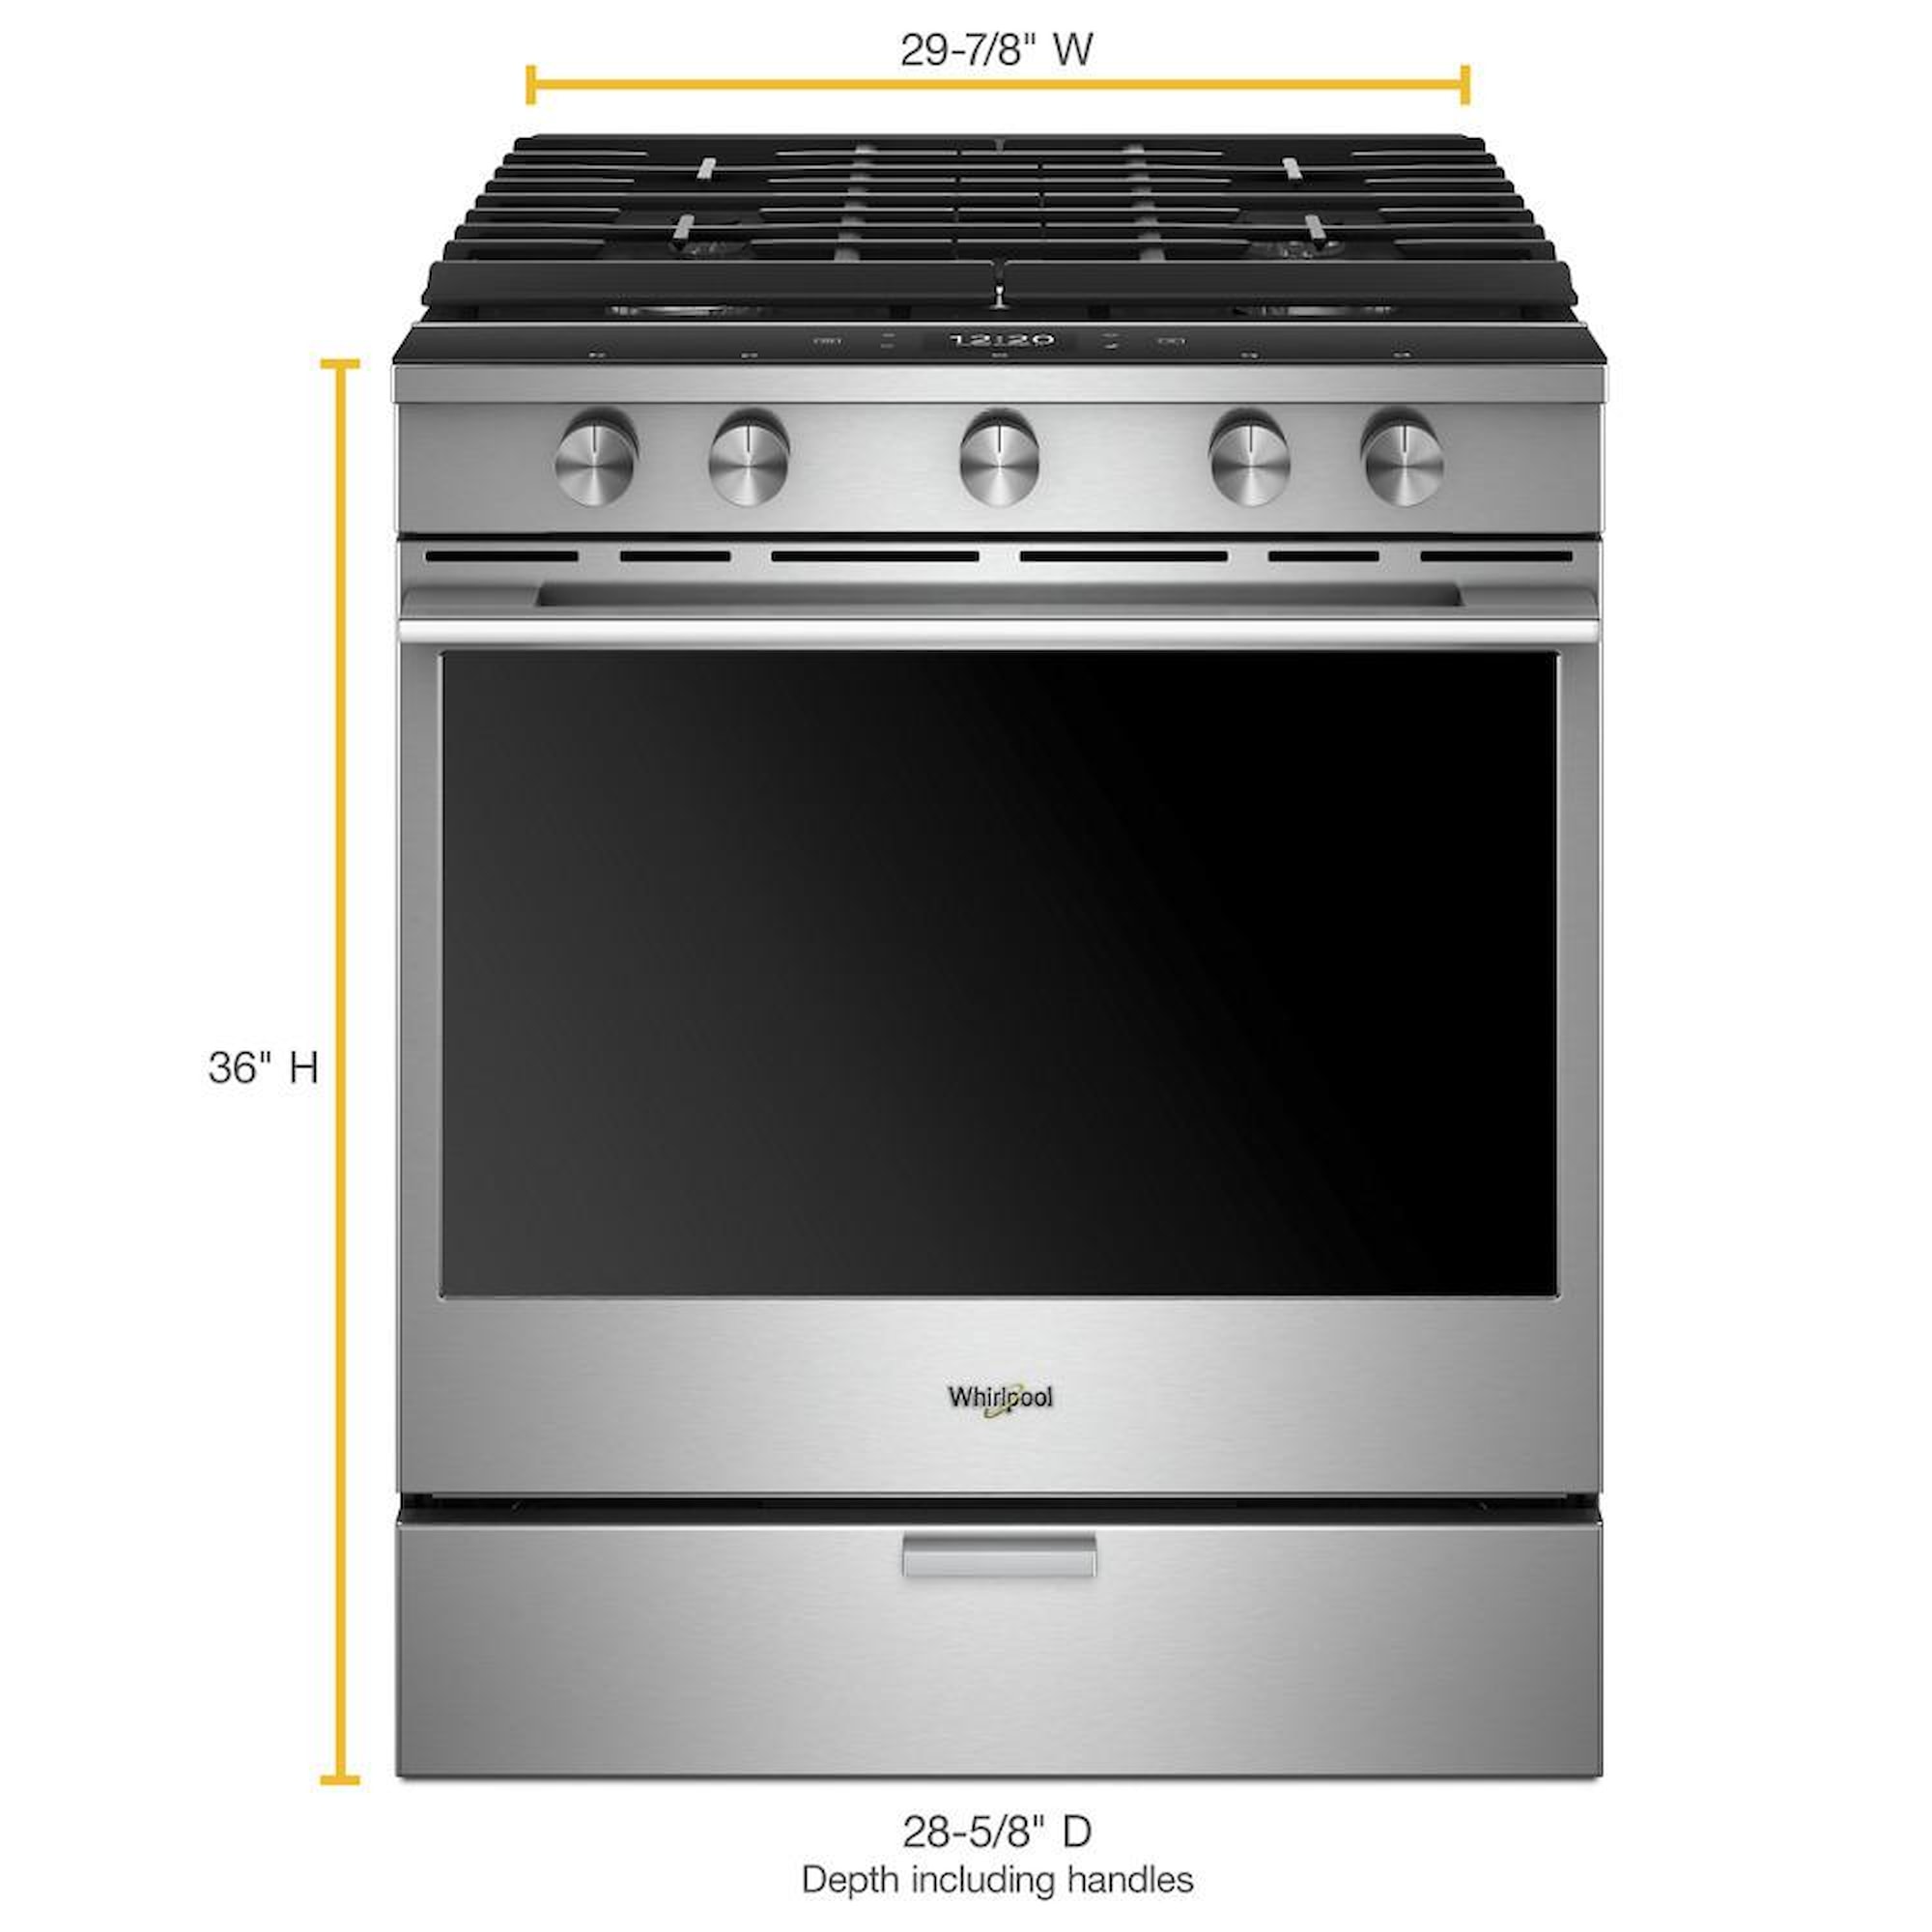 Whirlpool - WCG55US6HS - 36-inch Gas Cooktop with EZ-2-Lift